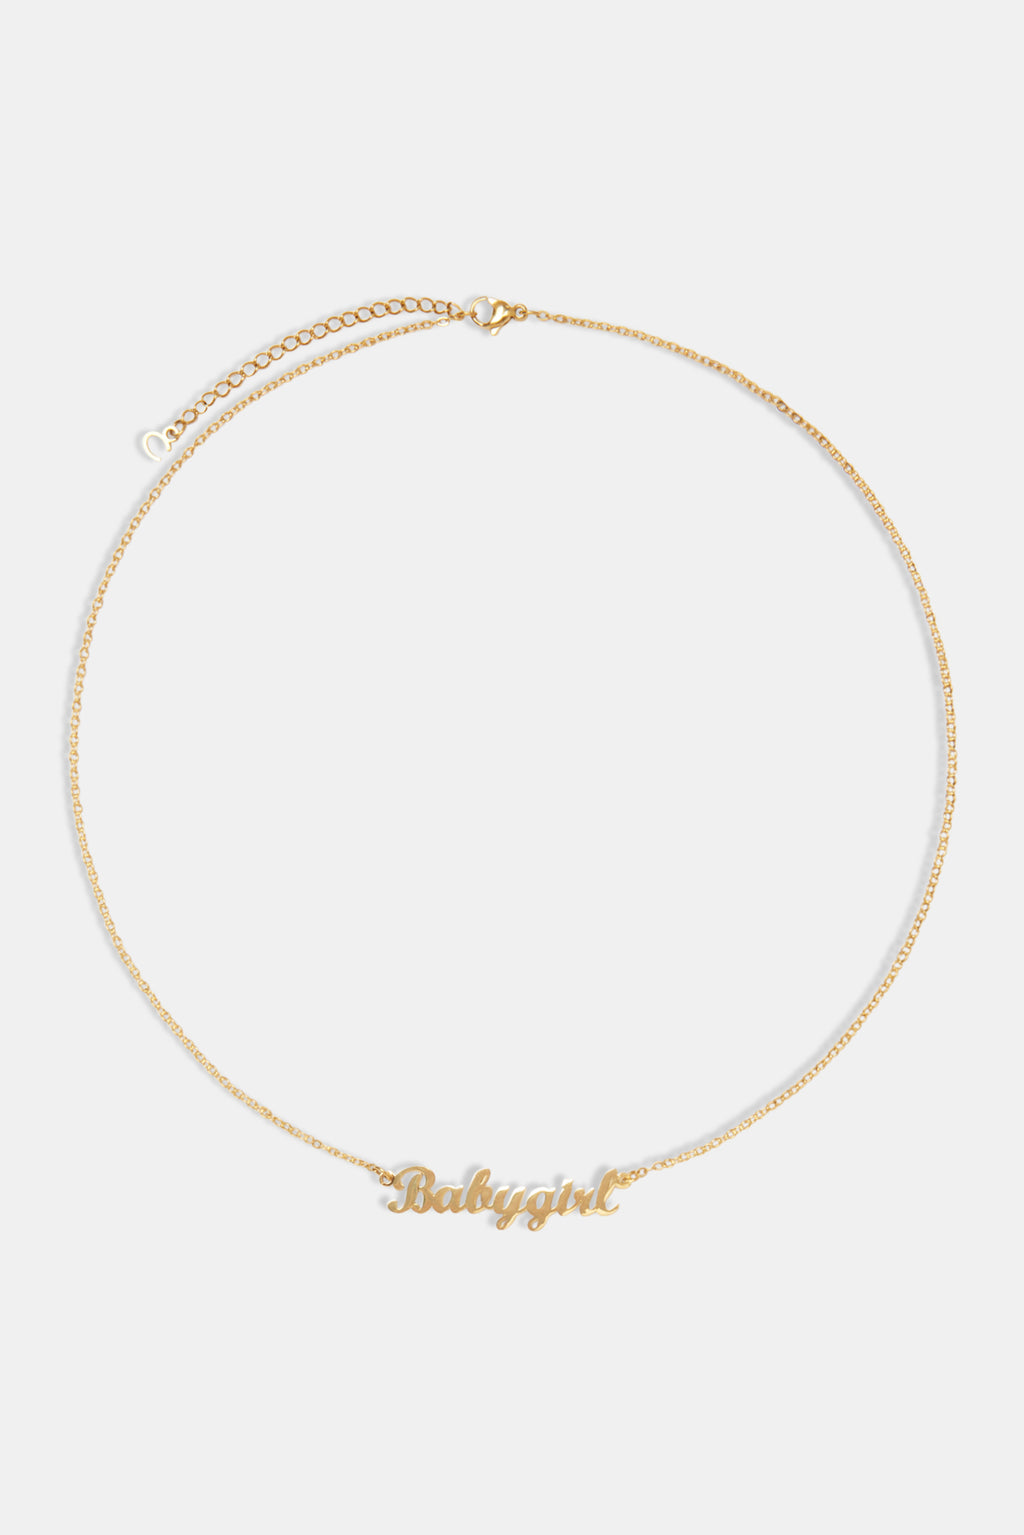 BABY GIRL GOLD NECKLACE – FEST OWL